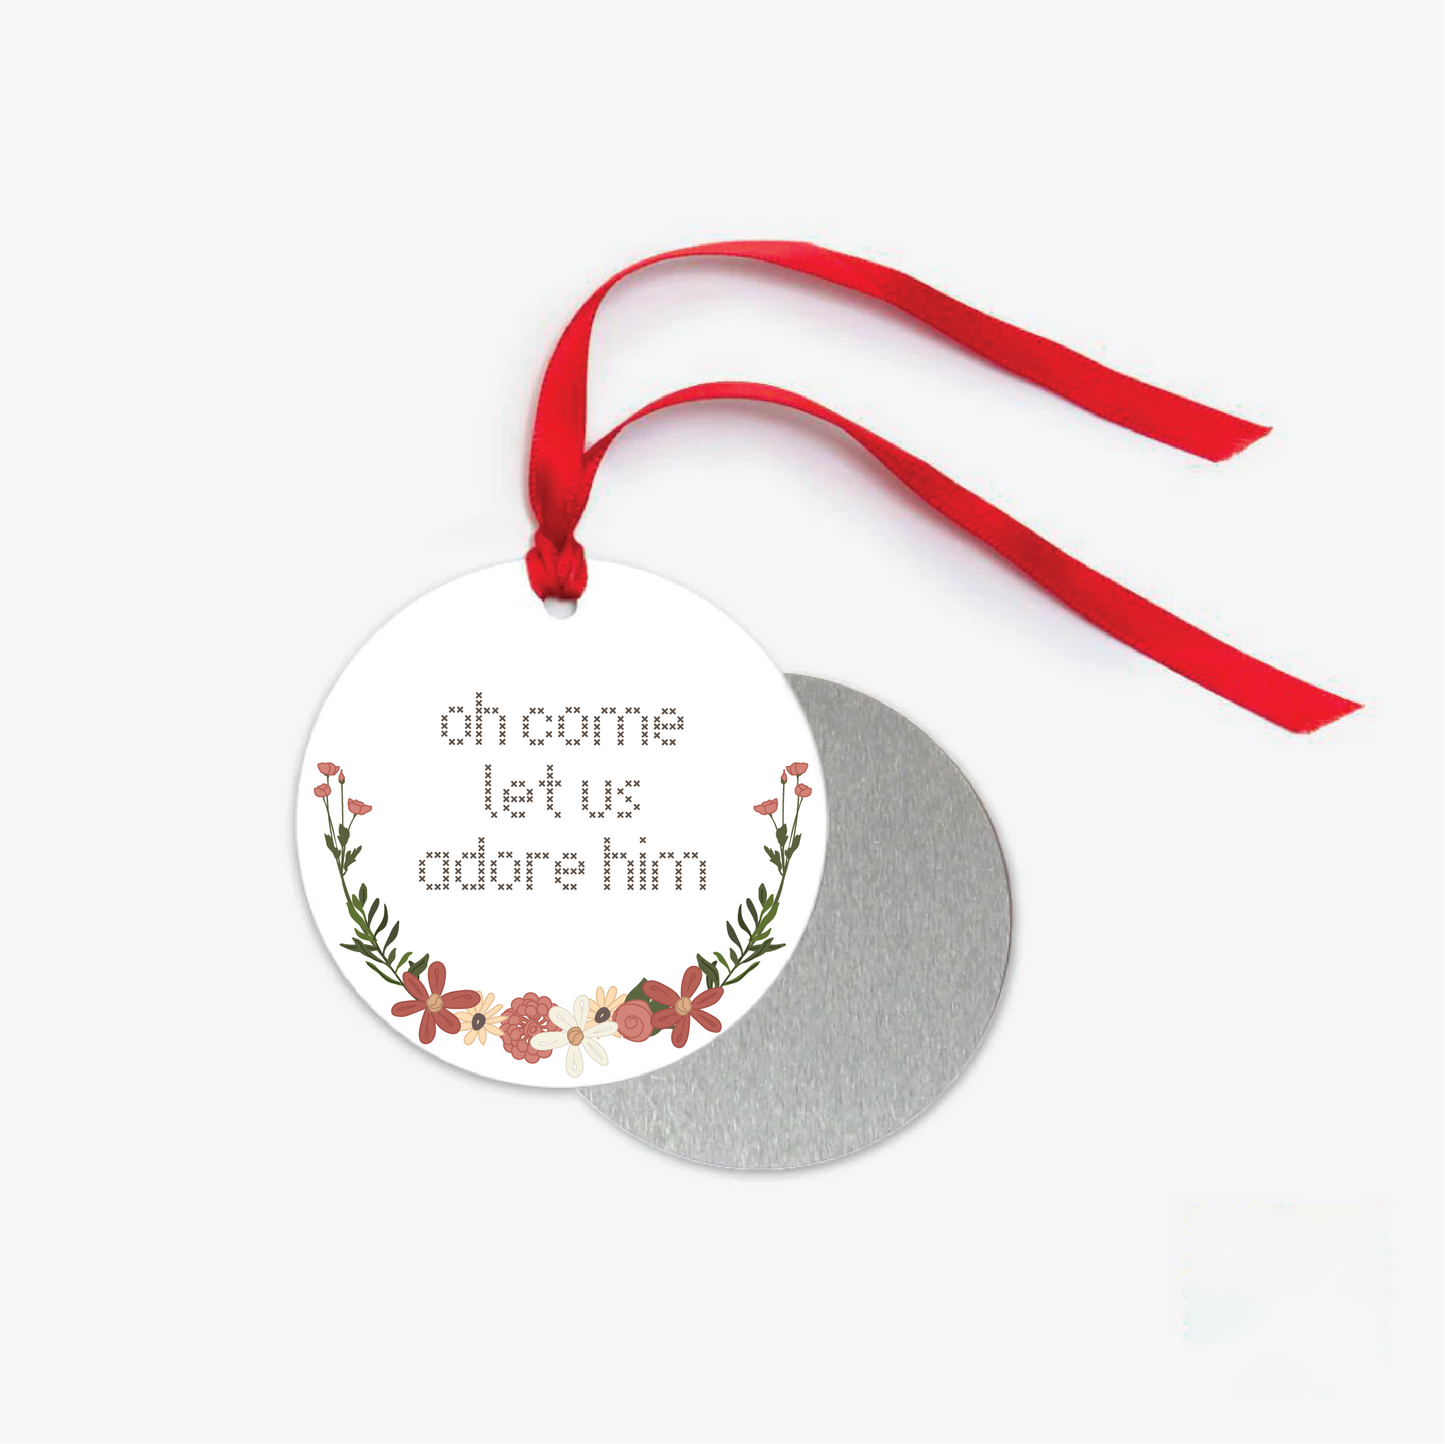 Oh Come Let Us Adore Him Christmas Ornament